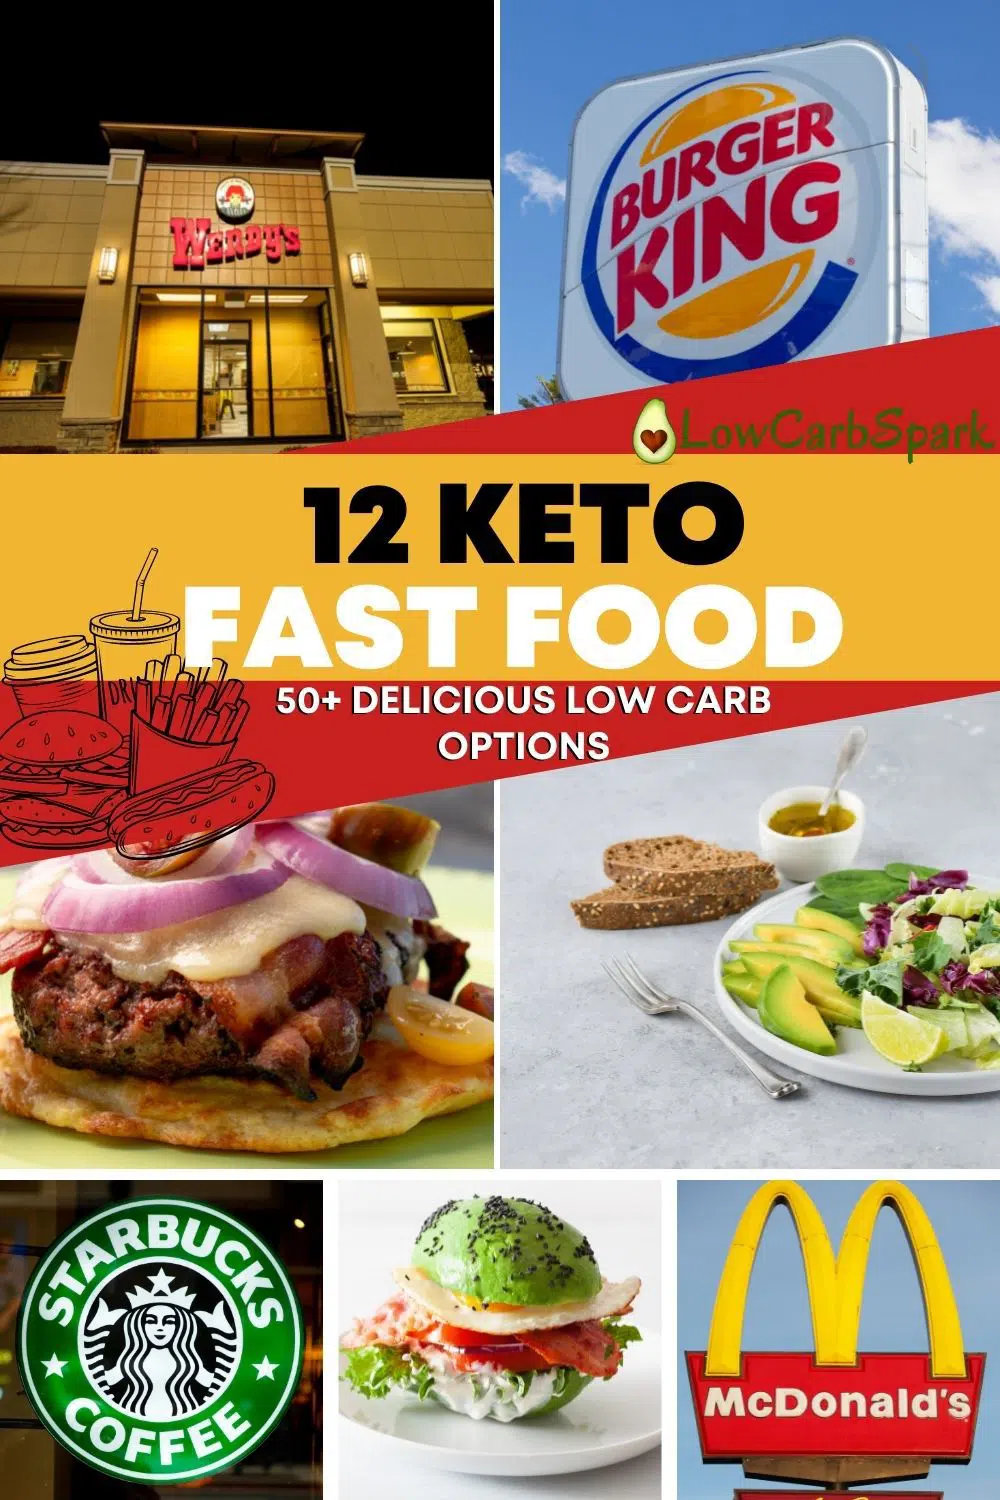 Top 12 Keto Fast Food - 50+ Delicious Low Carb Options